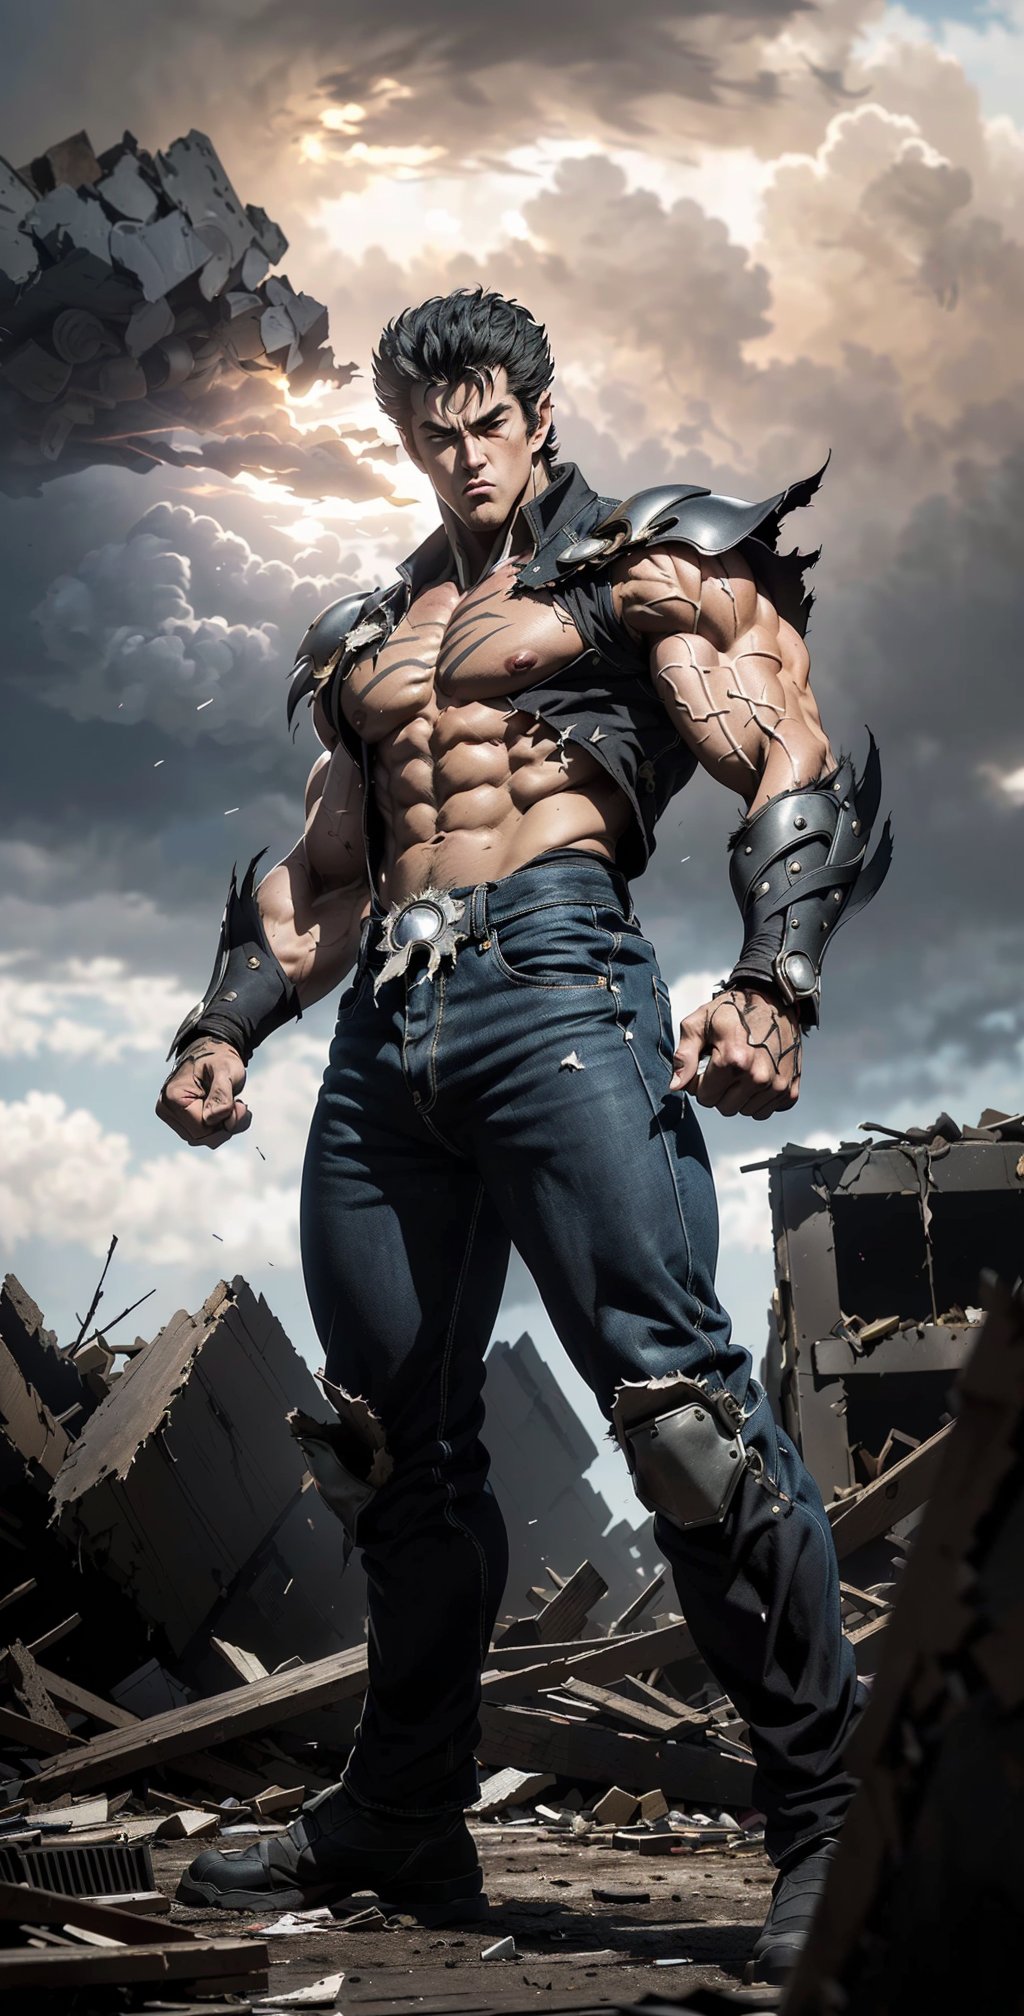 ((A close-up shot of Kenshiro, the protagonist from Fist of the North Star, standing confidently in the midst of a post-apocalyptic wasteland. His intimidating presence is accentuated by his rugged appearance and muscular physique. The desolate landscape behind him, scattered with ruins and debris, serves as a stark reminder of the chaos that surrounds him. Rays of golden sunlight break through the dark, ominous clouds, casting a dramatic glow on Kenshiro and adding an ethereal touch to the scene. The winds whip through his tattered clothing, creating dynamic motion and emphasizing his fierce determination. As his fists glow with an otherworldly power, debris and dust are effortlessly lifted into the air, creating a whirlwind of destruction. In the distance, a few figures cower in fear, witnessing the sheer might of Kenshiro's unfathomable strength.))